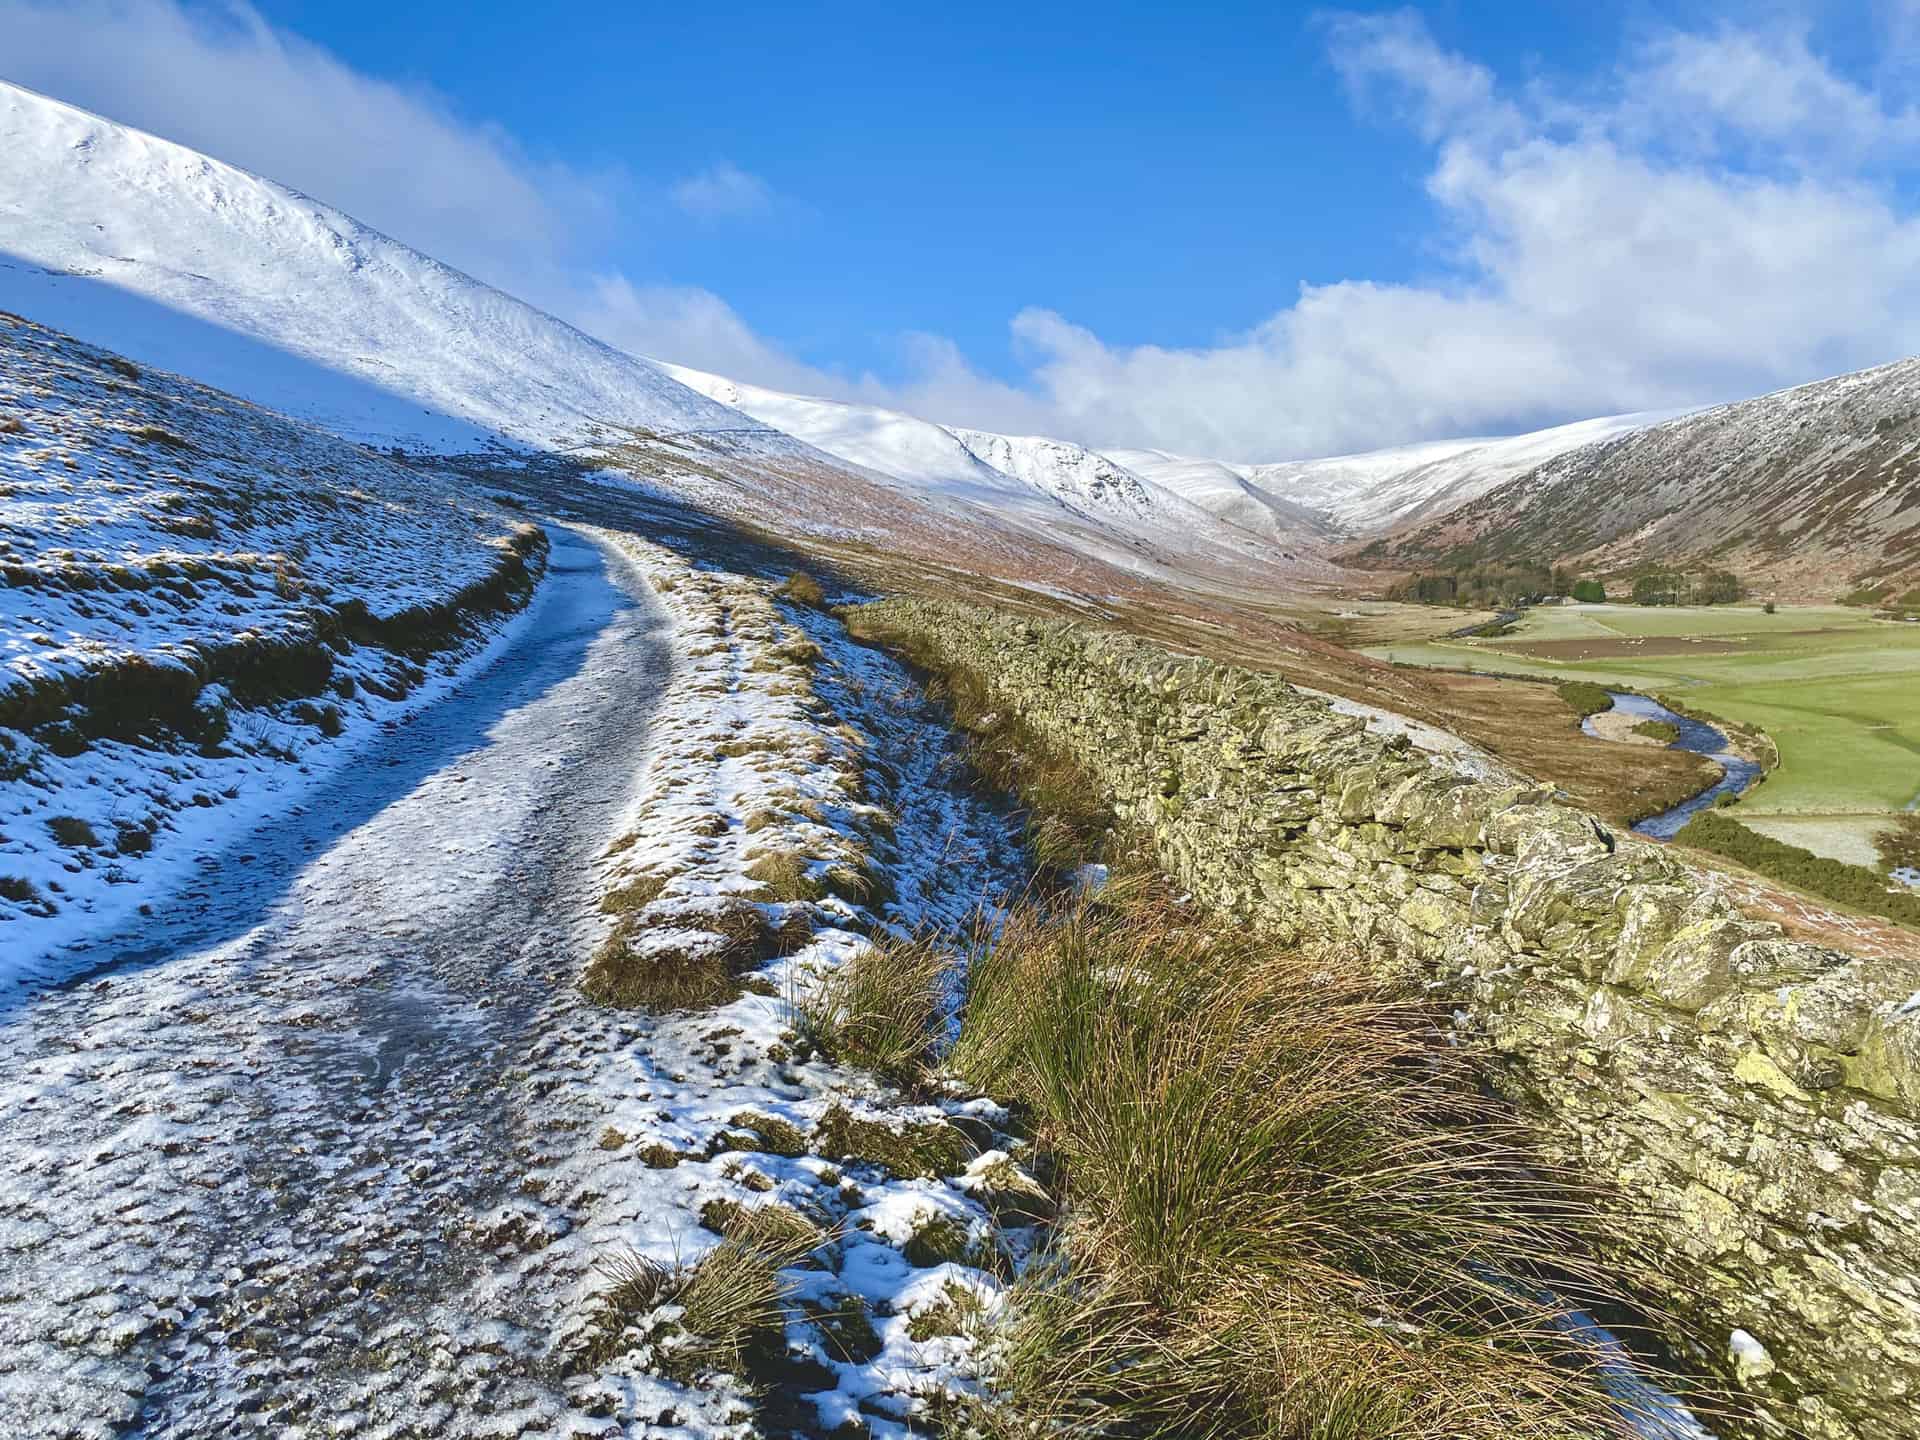 The River Caldew, visible over the wall, flows east through the valley between Bowscale Fell and Carrock Fell. It's source is high up on Skiddaw, between the summit and Sale How.